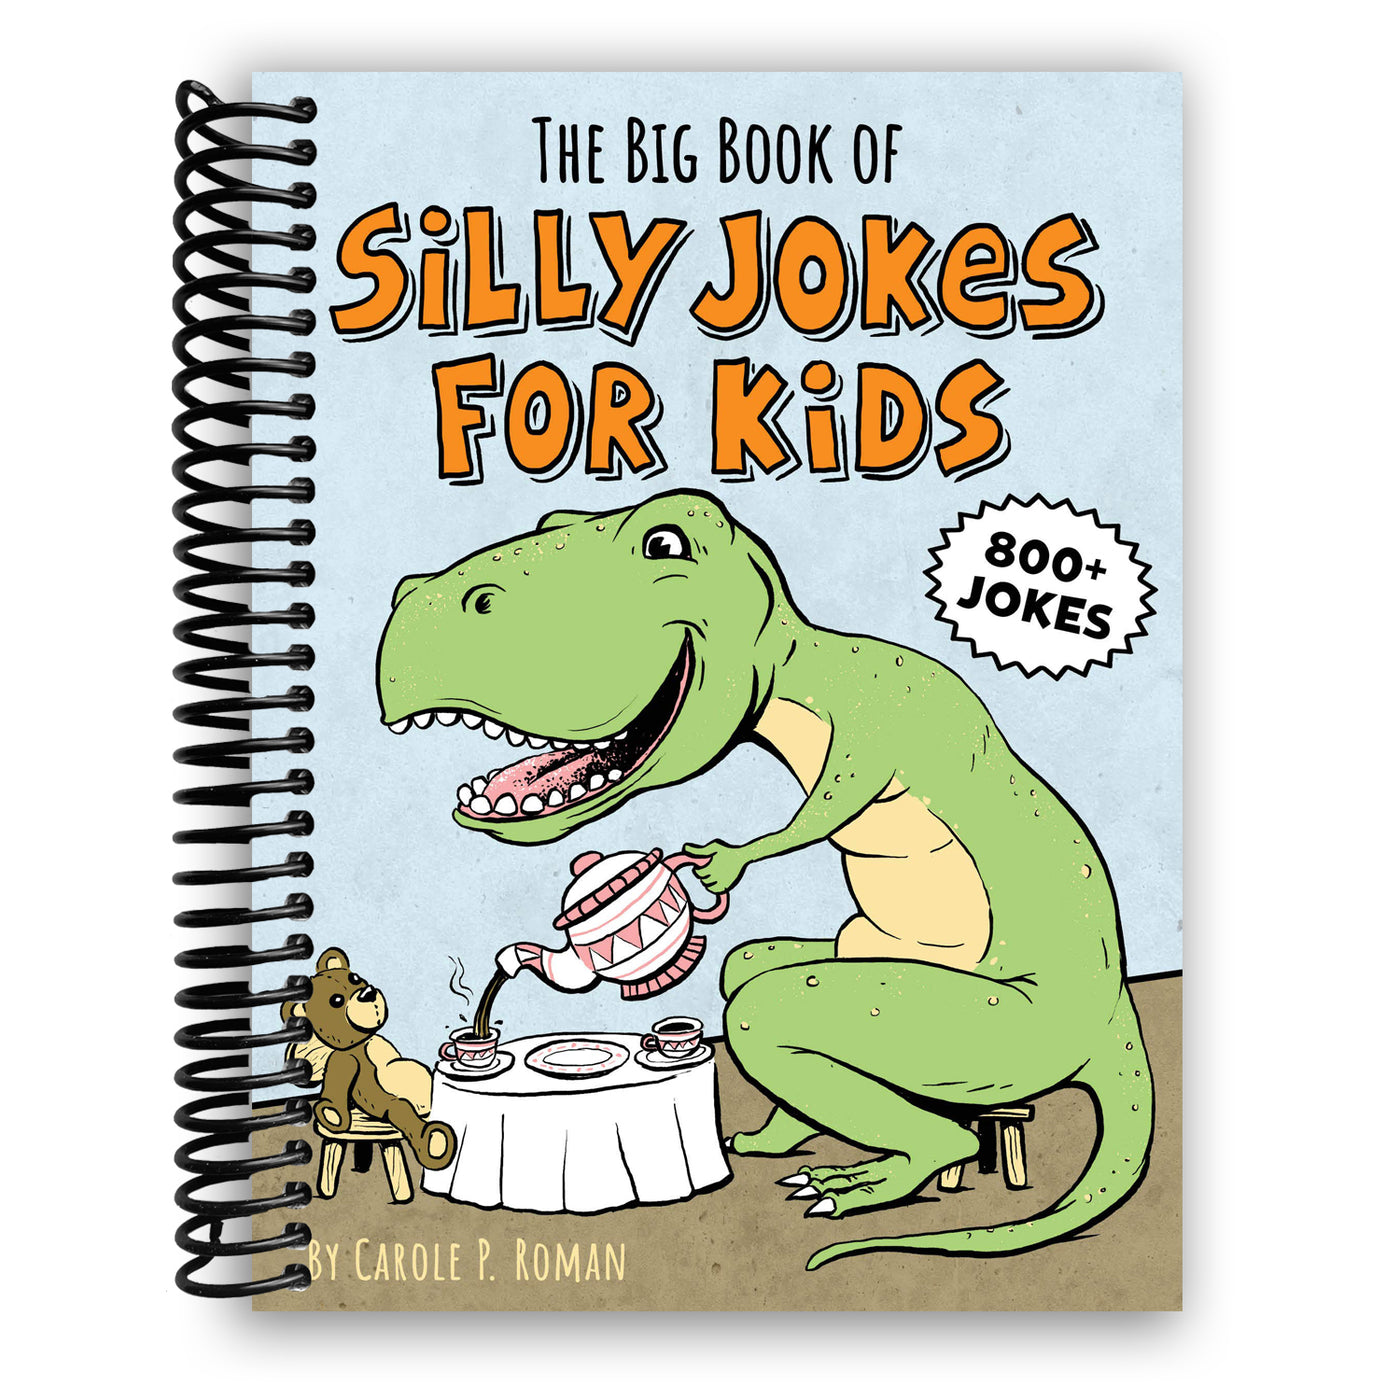 The Big Book of Silly Jokes for Kids: 800+ Jokes! (Spiral Bound)